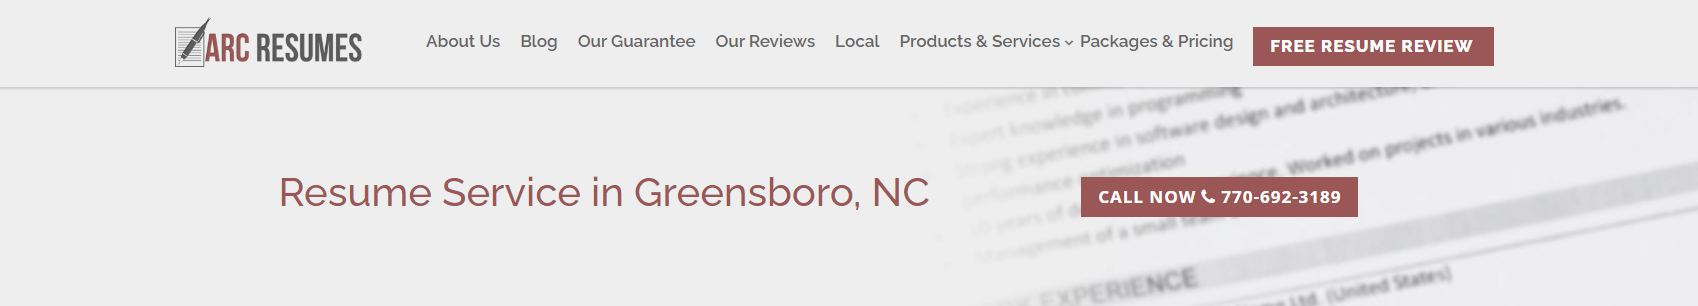 resume writing services in greensboro arc resumes 2